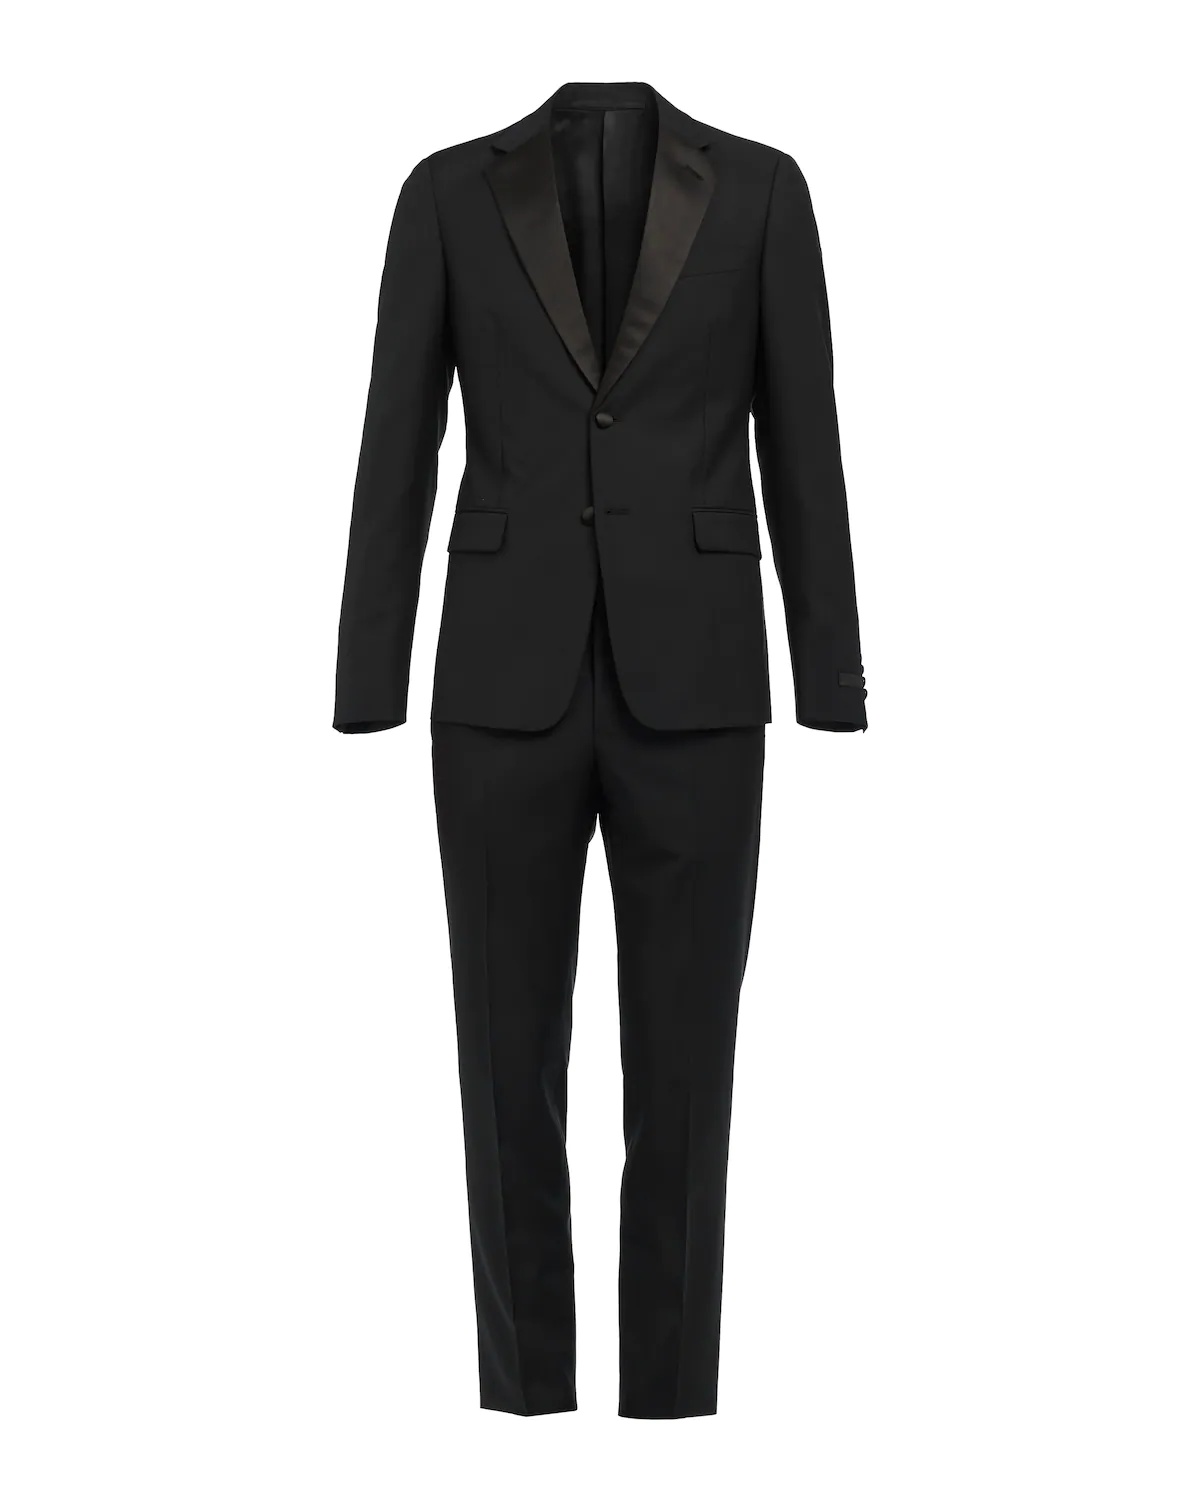 Singled-breasted two-button wool mohair tuxedo - 1